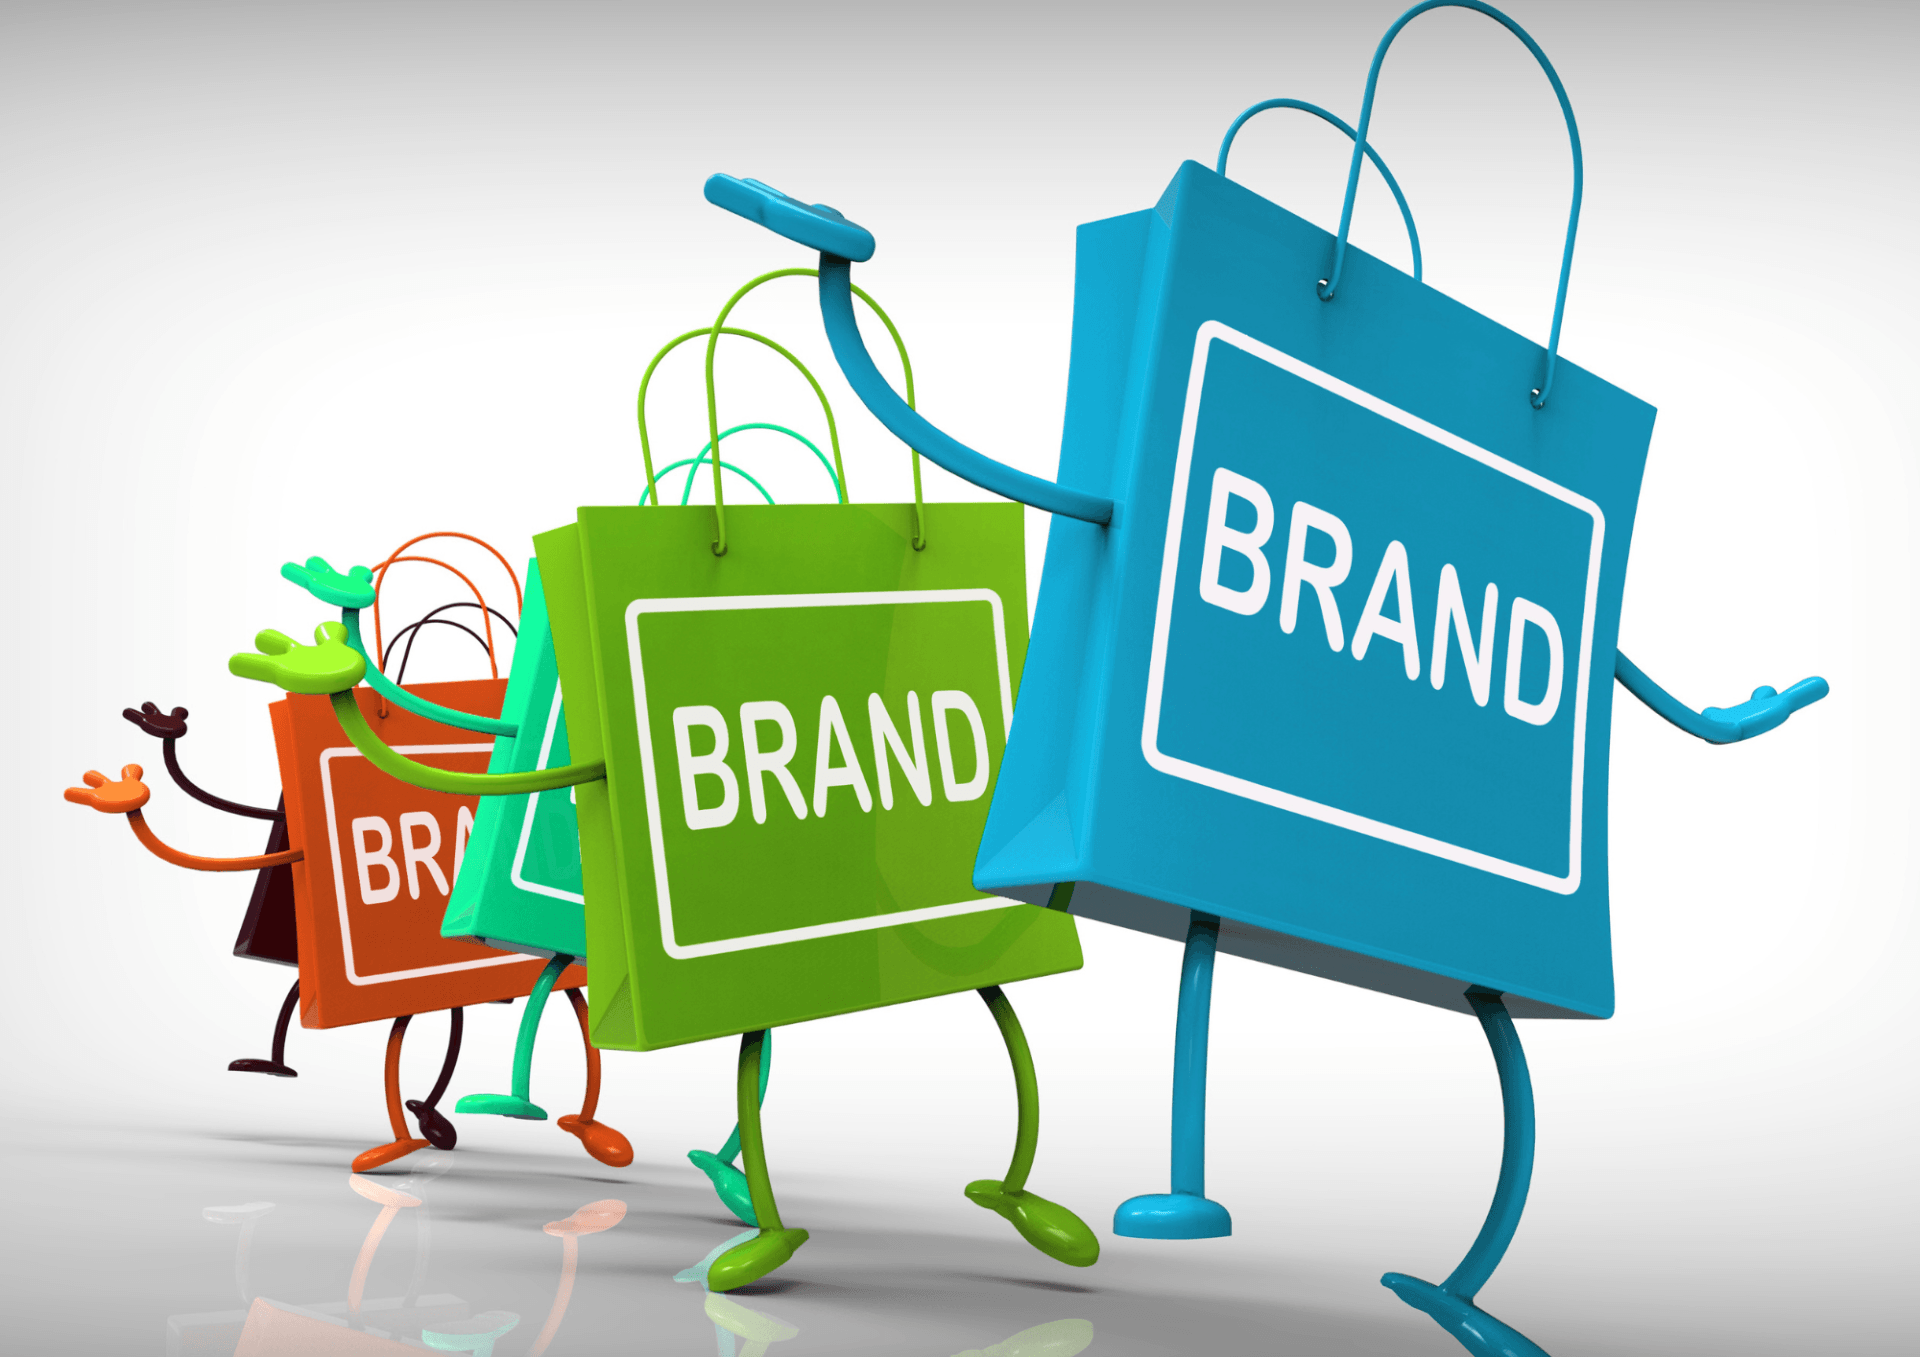 ECOMMERCE CAN BROADEN YOUR BRAND & EXPAND YOUR BUSINESS